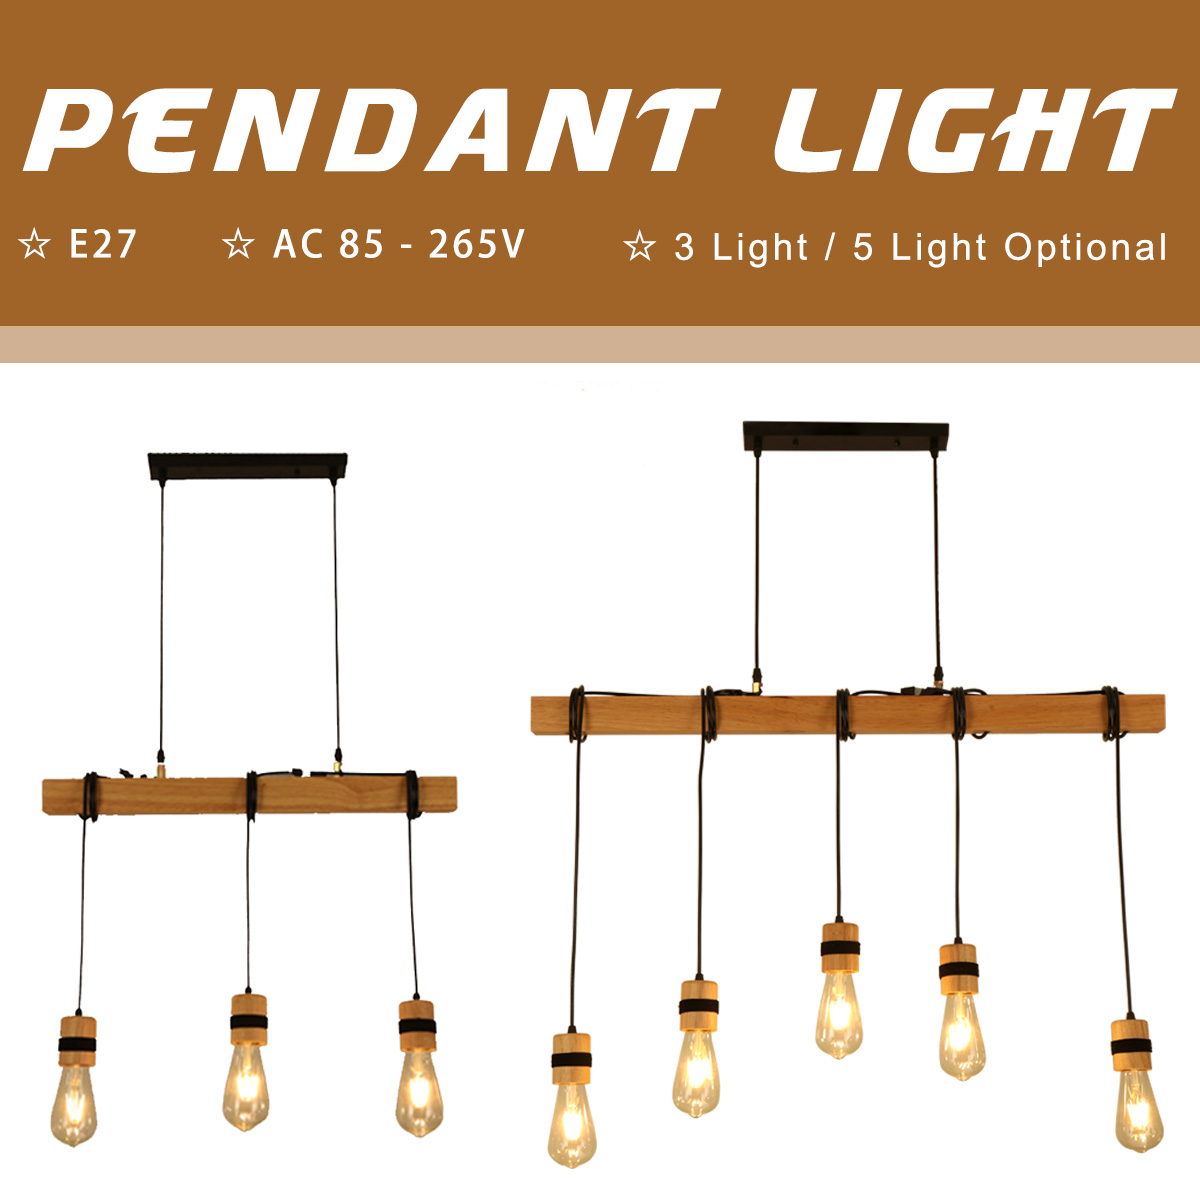 AC85-265V-Industrial-Wooden-E27-Pendant-Light-Ceiling-Lamp-Chandeliers-Lighting-Fixtures-Without-Bul-1815131-1